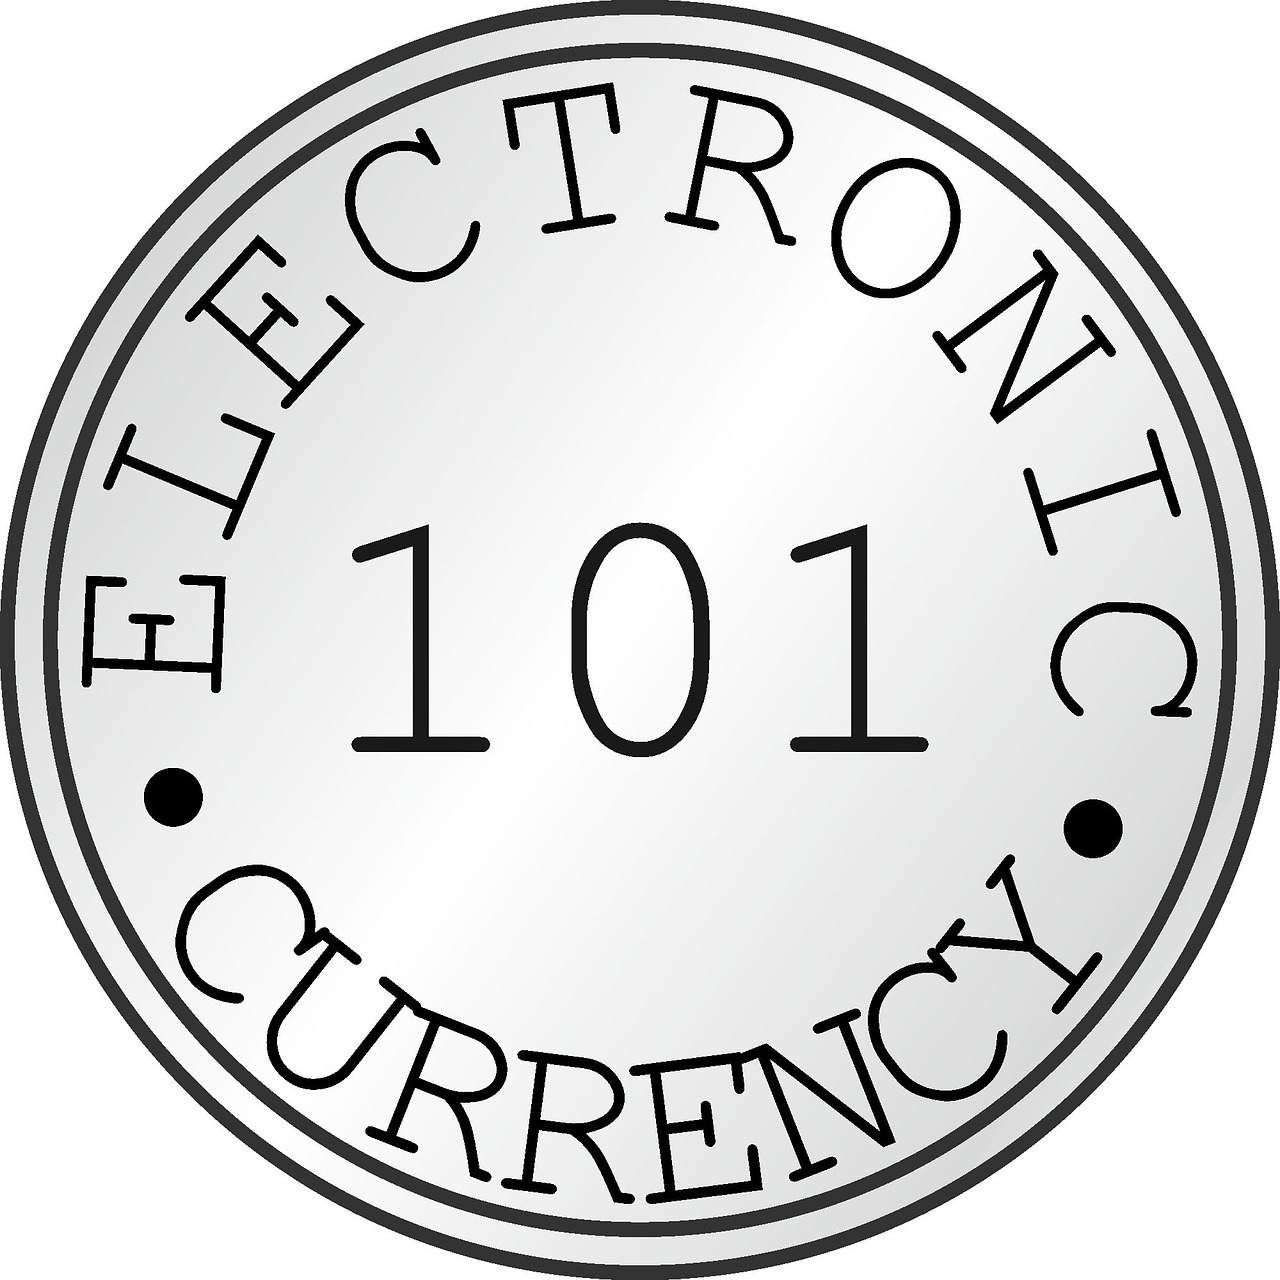 electronic currency bitcoin free photo